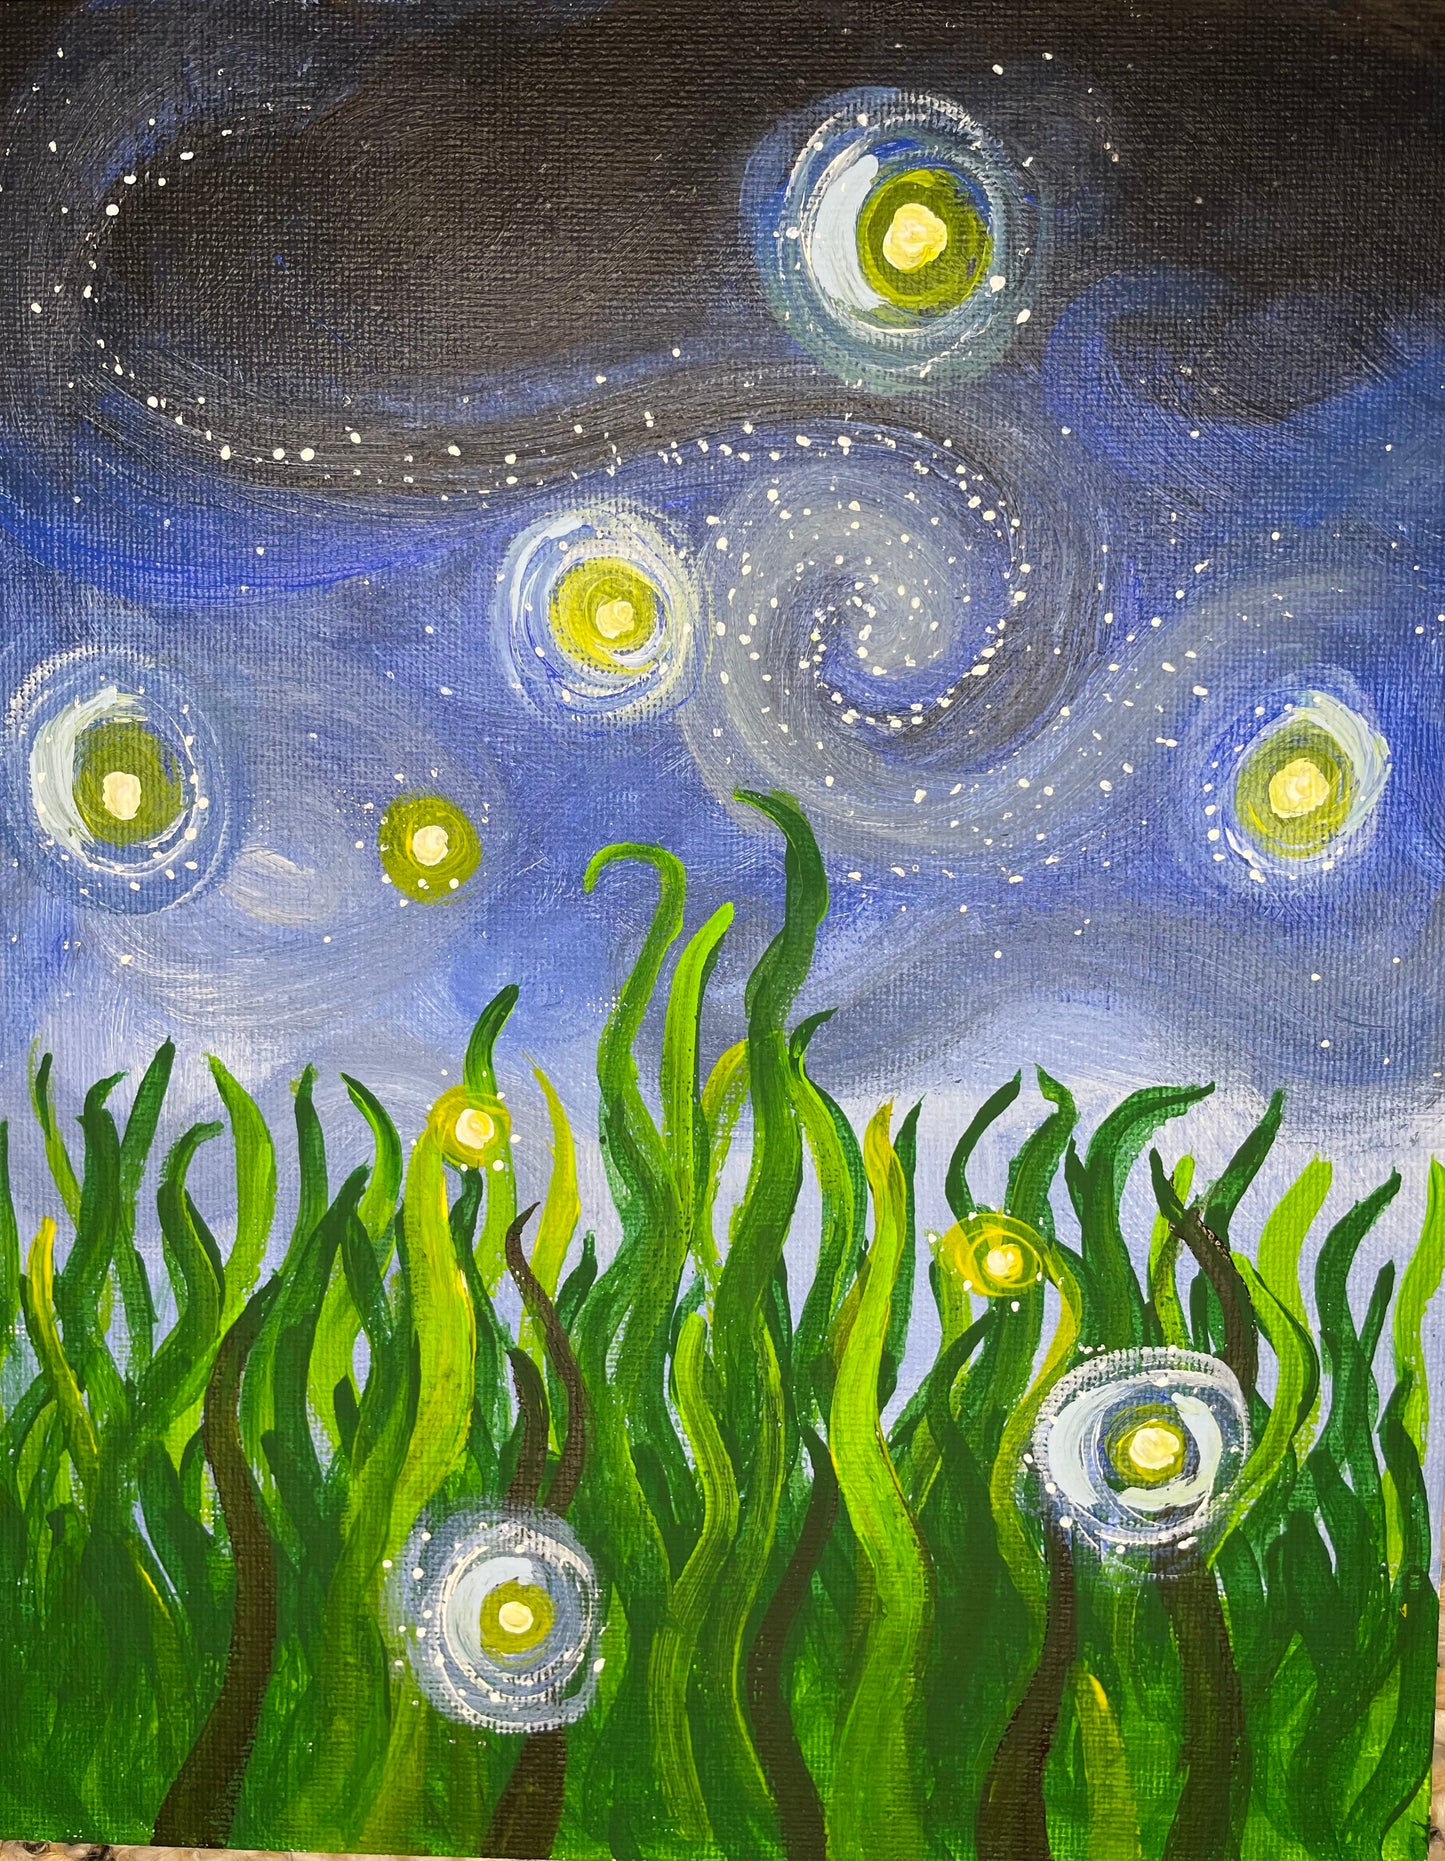 Fire Fly Starry Night Paint Kit